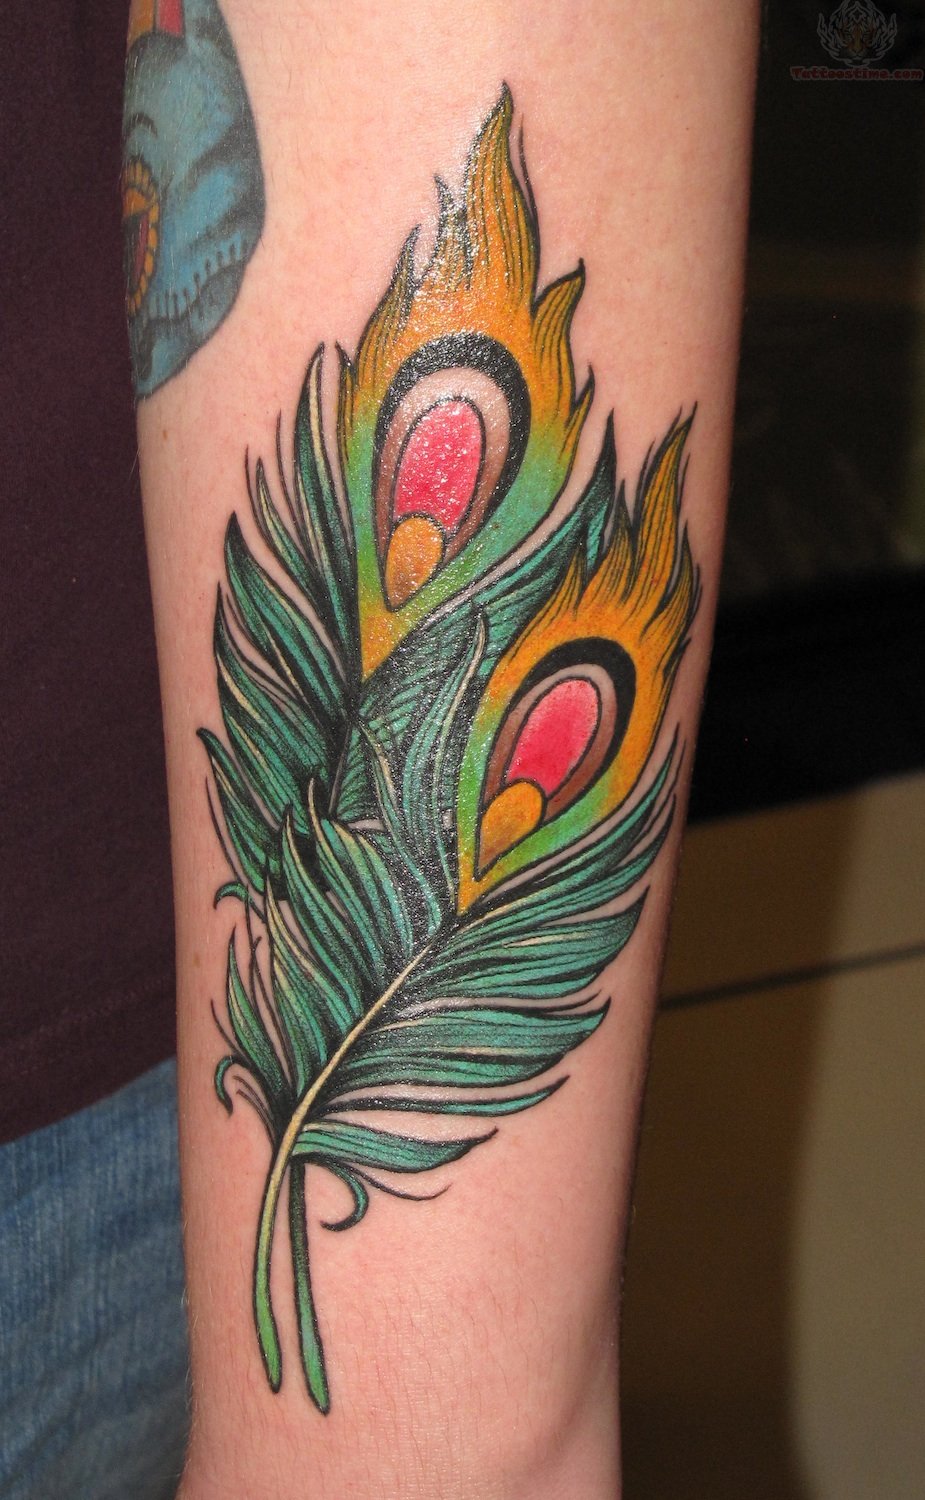 Posted in gallery: Small Peacock Feather Tattoo.